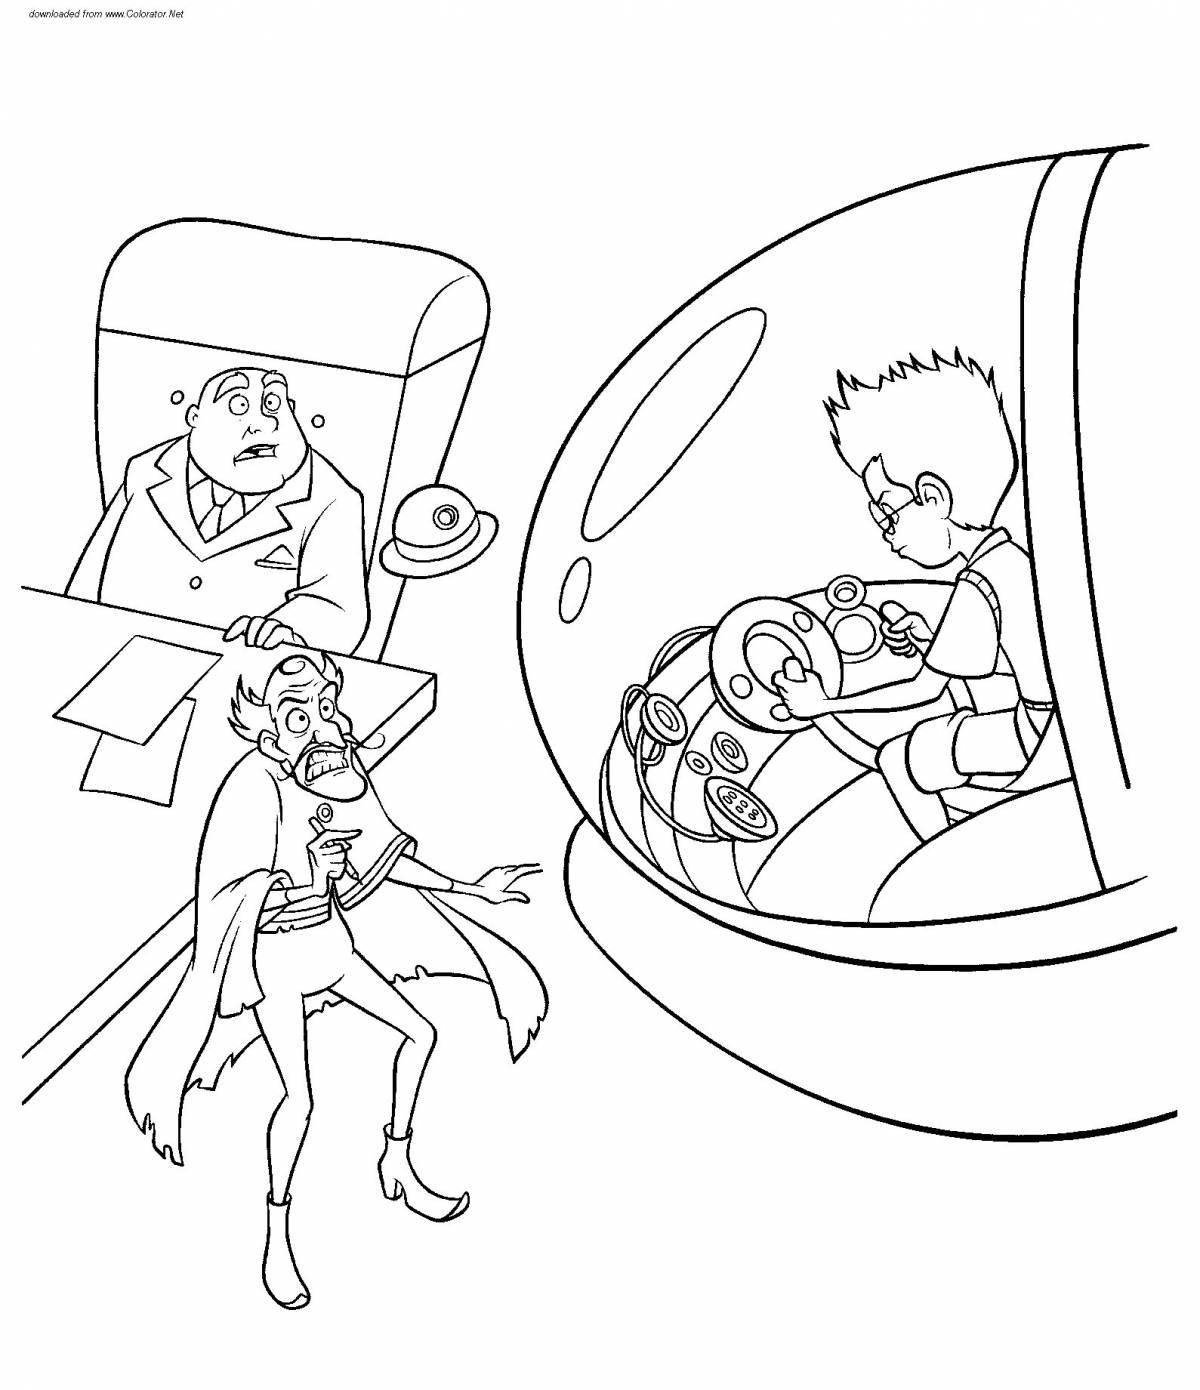 Time traveler's magnificent hatch coloring page